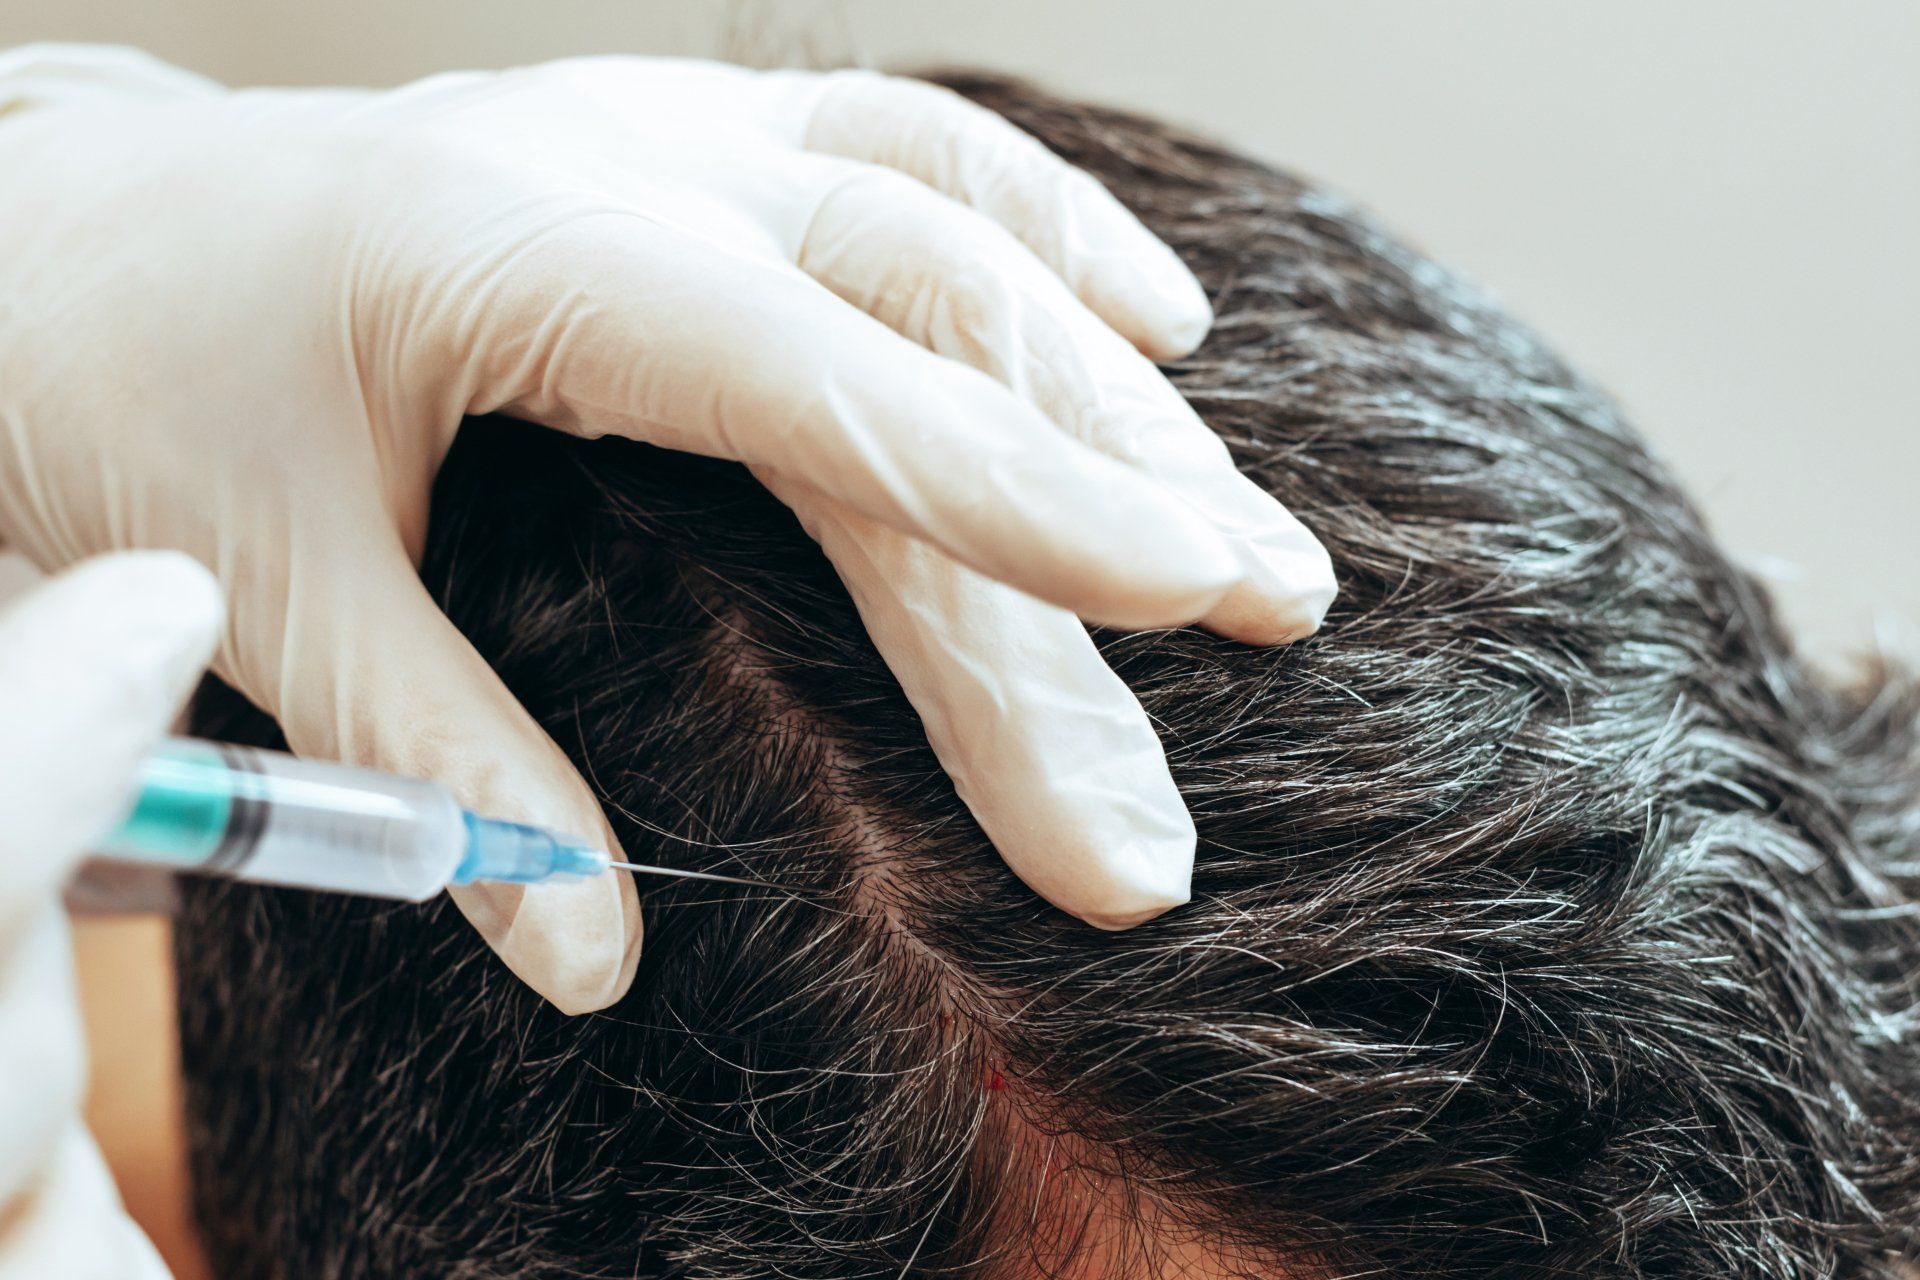 Man receives PRP injection to treat hair loss